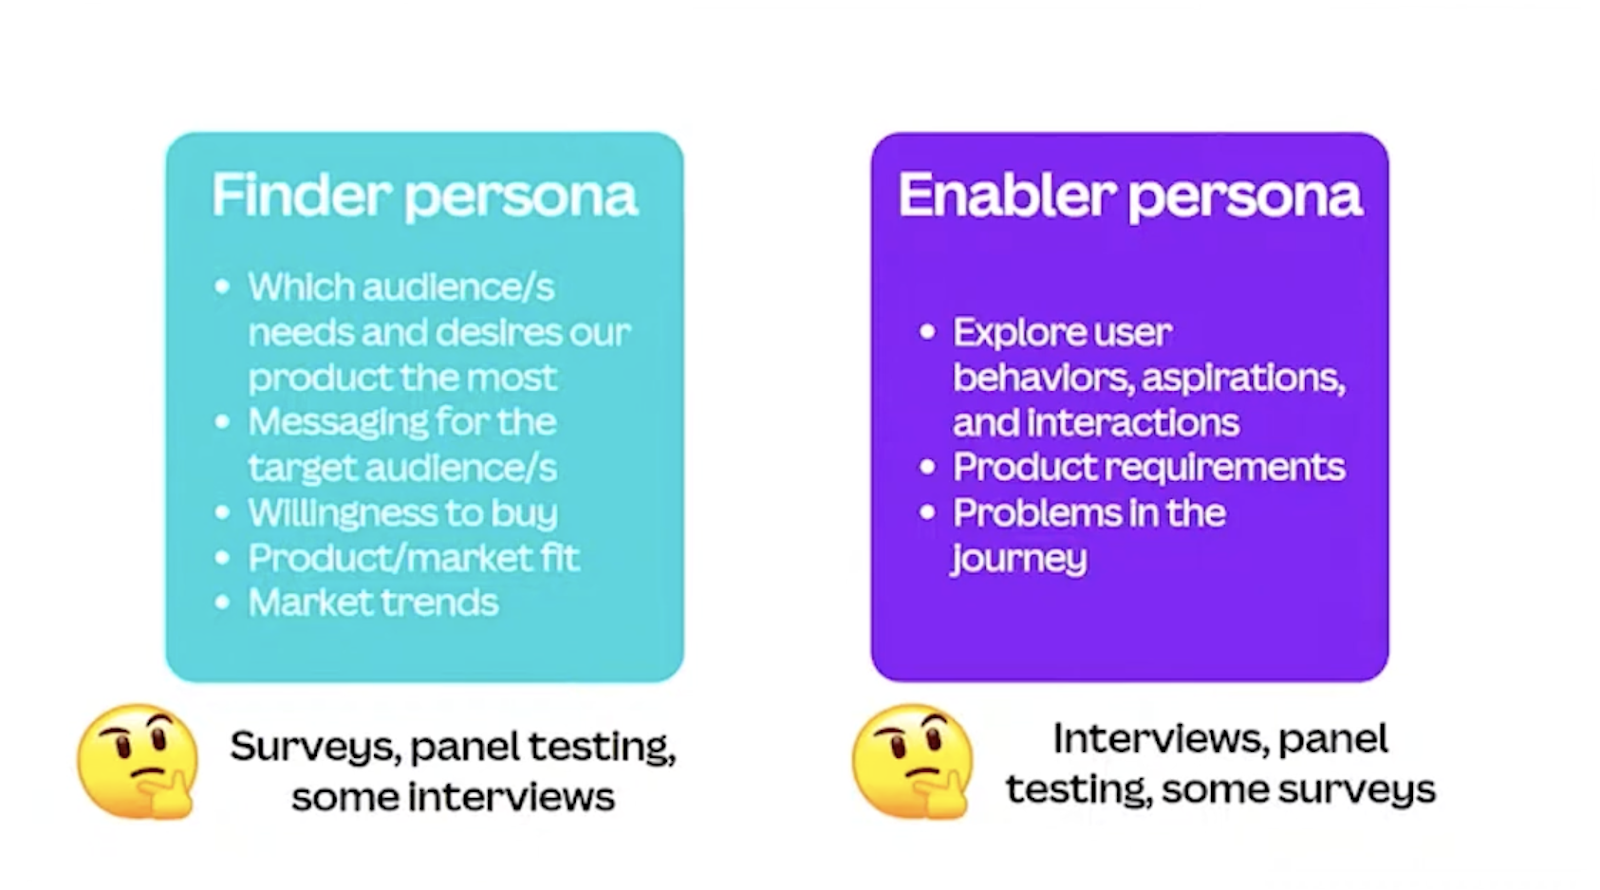 Finder persona: Which audience/s needs and desires our product the most, messaging for the target audience/s, willingness to buy, product/market fit, and market trends. Enabler persona: Explore user behaviors, aspirations, and interactions, product requirements, problems in the journey. 